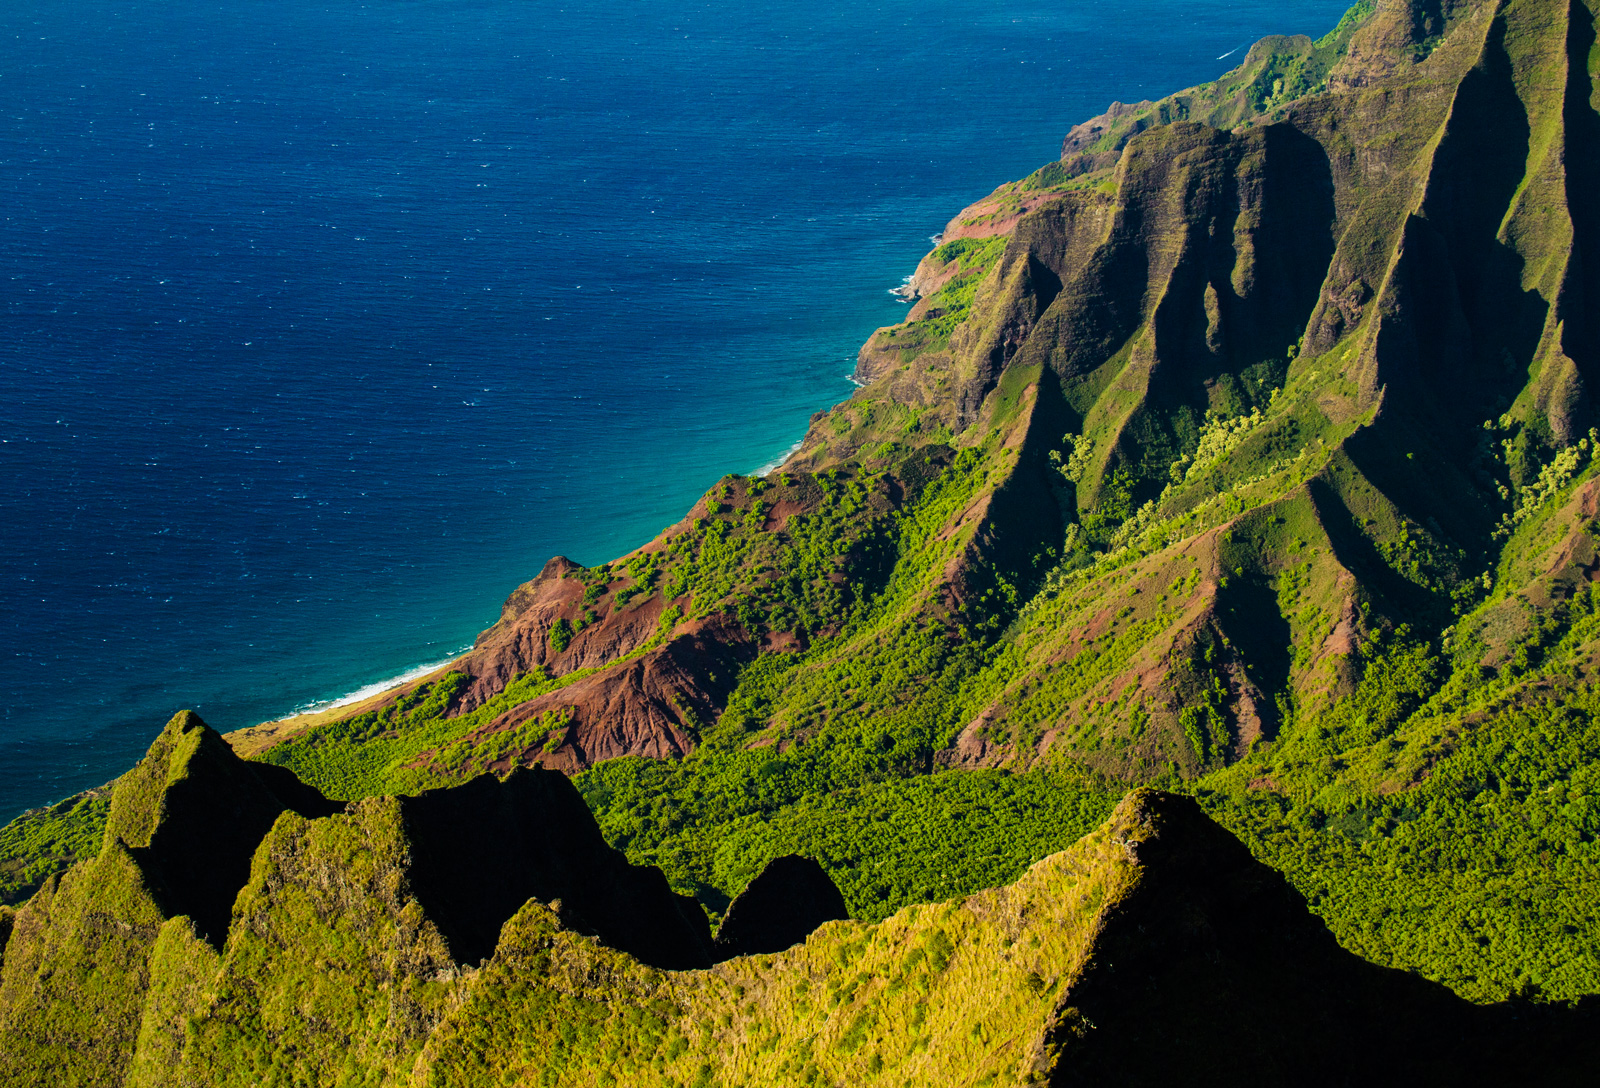 The gorgeous Kalalau Valley, one of the main highlights of the Na Pali Coast.